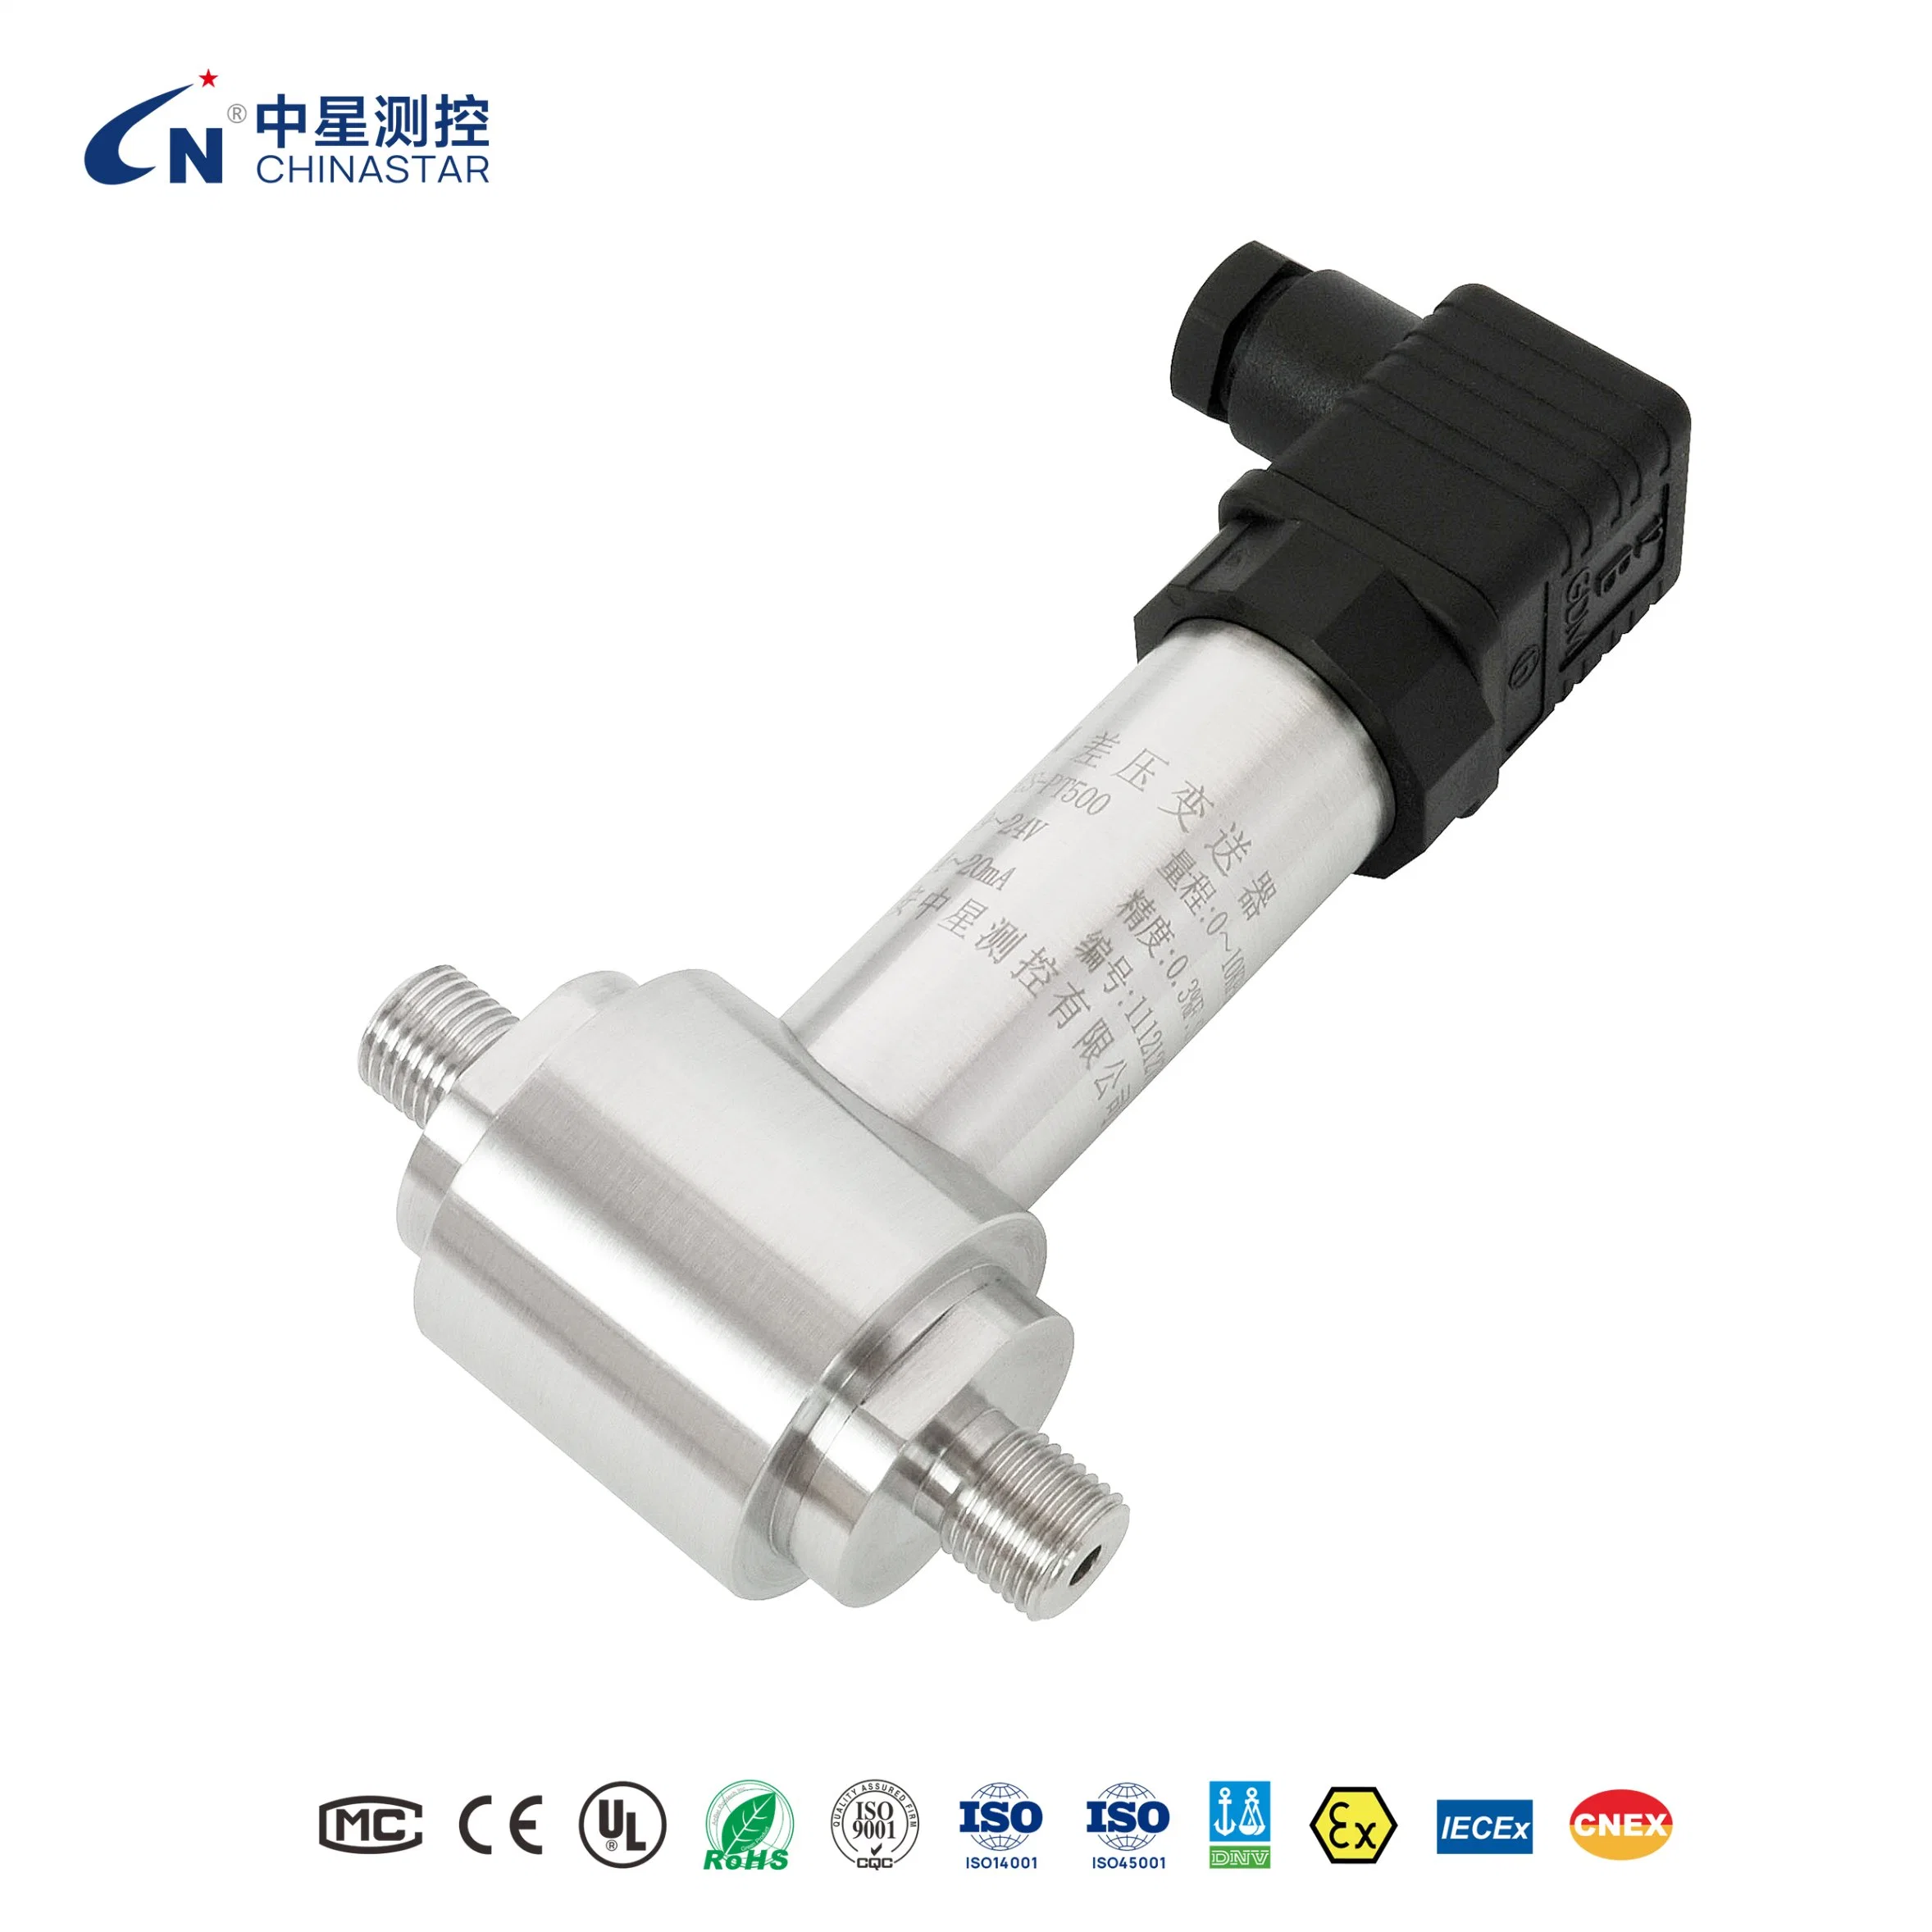 Differential Pressure Transmitter Compact Size Full Solid Insulation High Stability Reliability and Accuracy